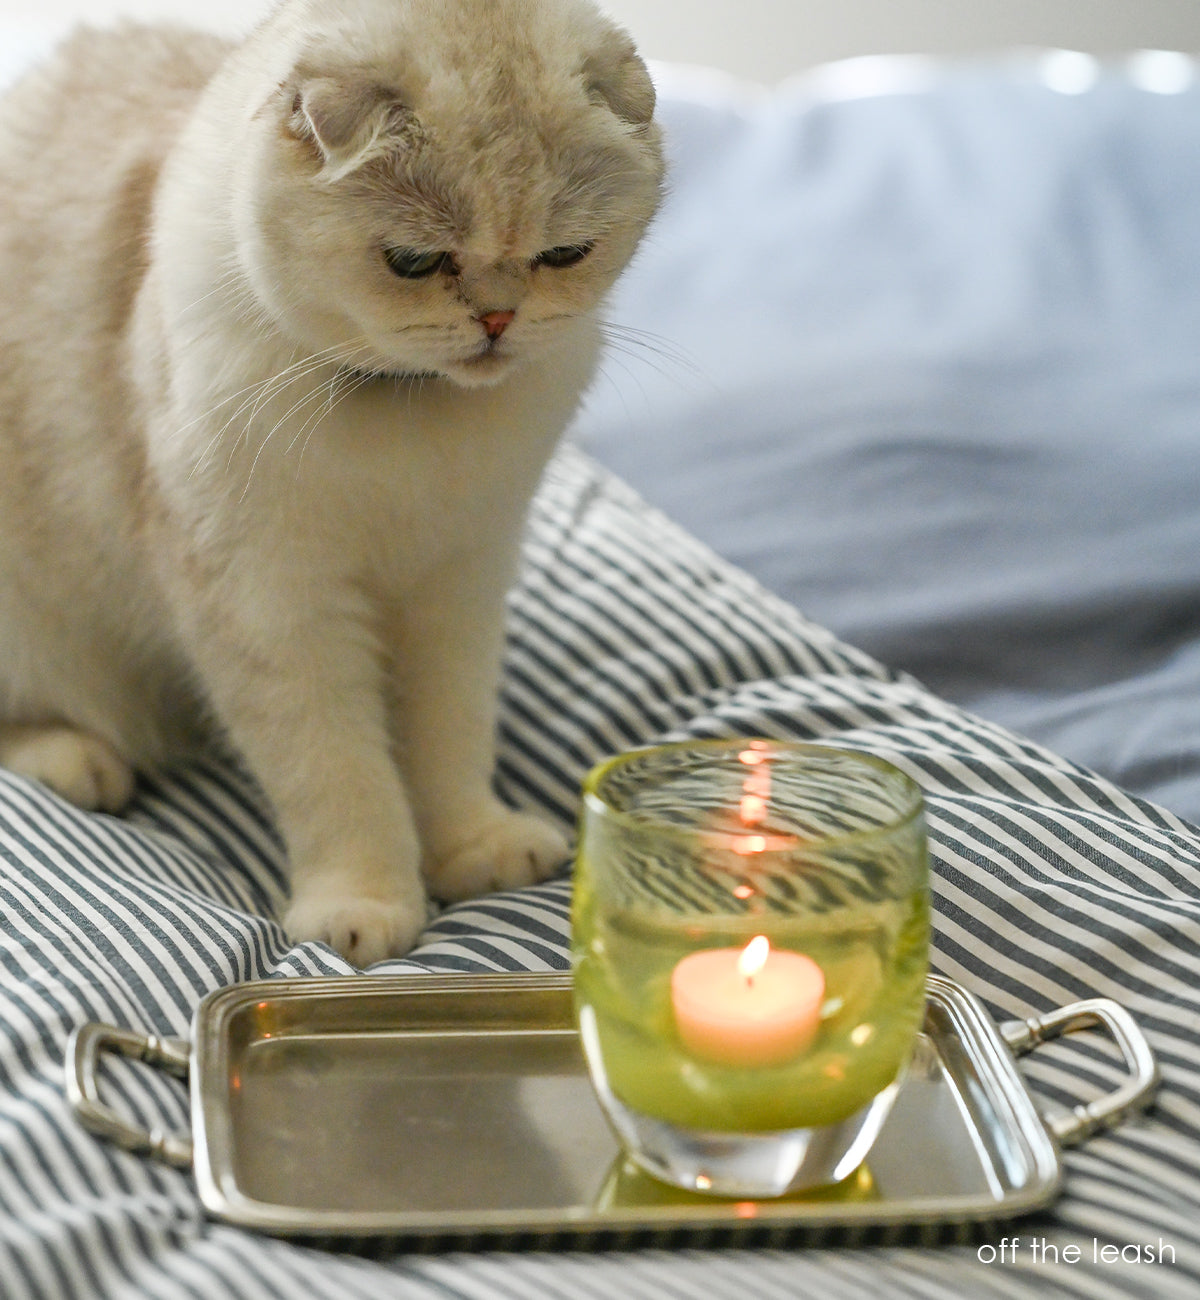 off the leash is a moss green hand-blown glass candle holder. transparent towards the top.